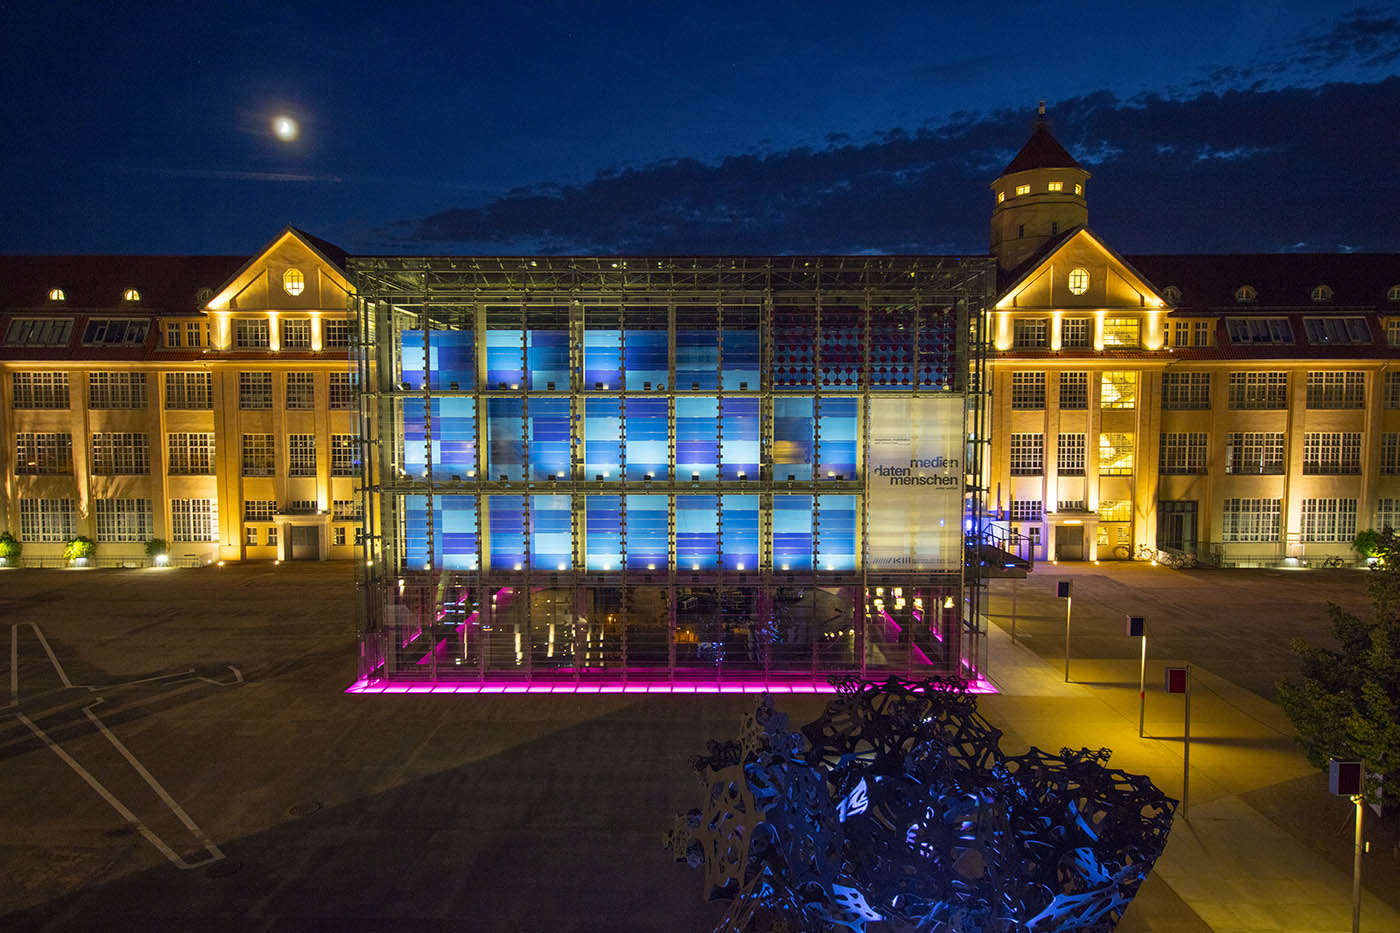  The picture shows the illuminated ZKM building at night